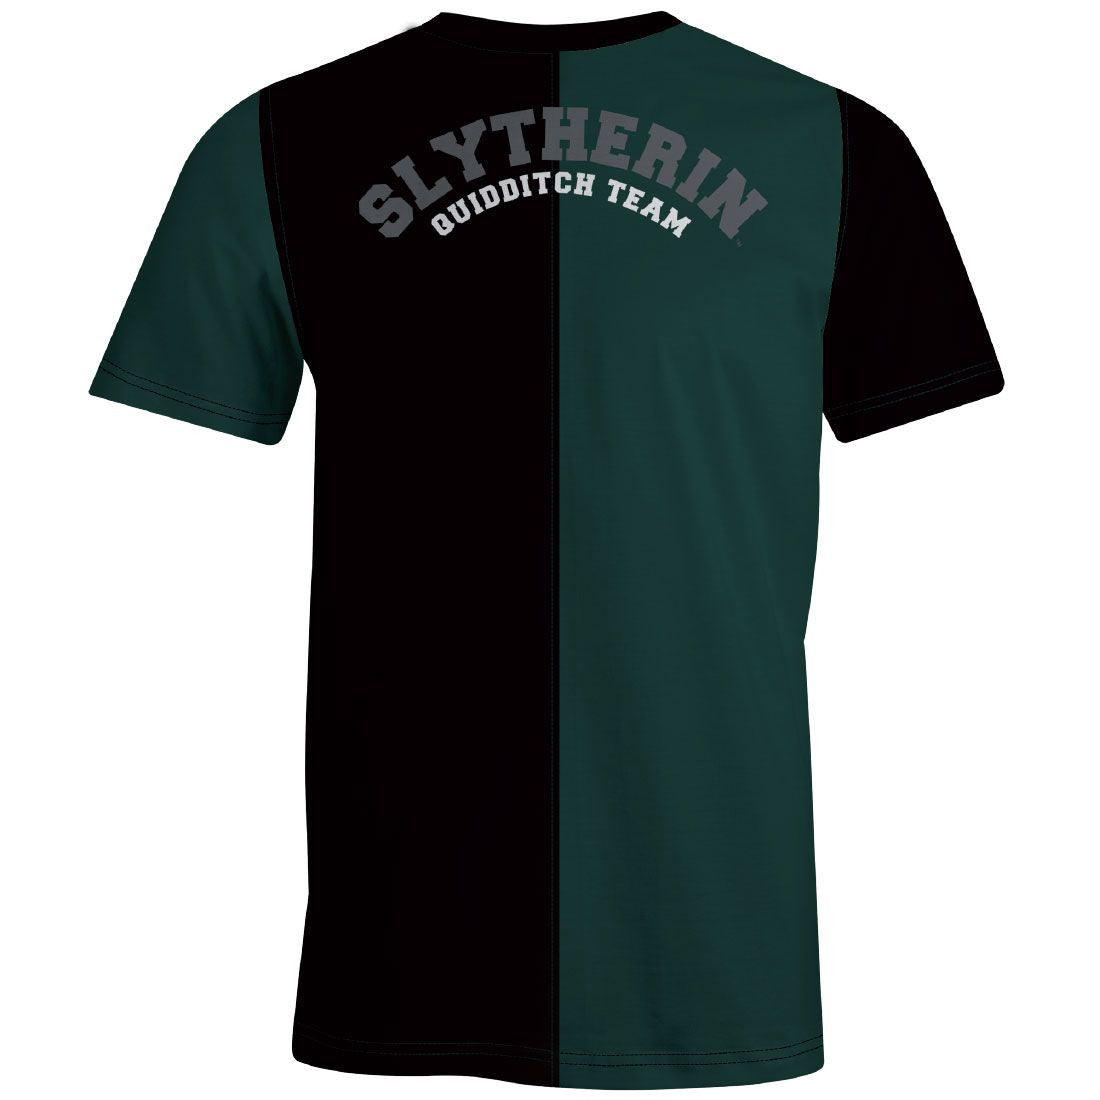 T-shirt Harry Potter - Slytherin Quidditch Team